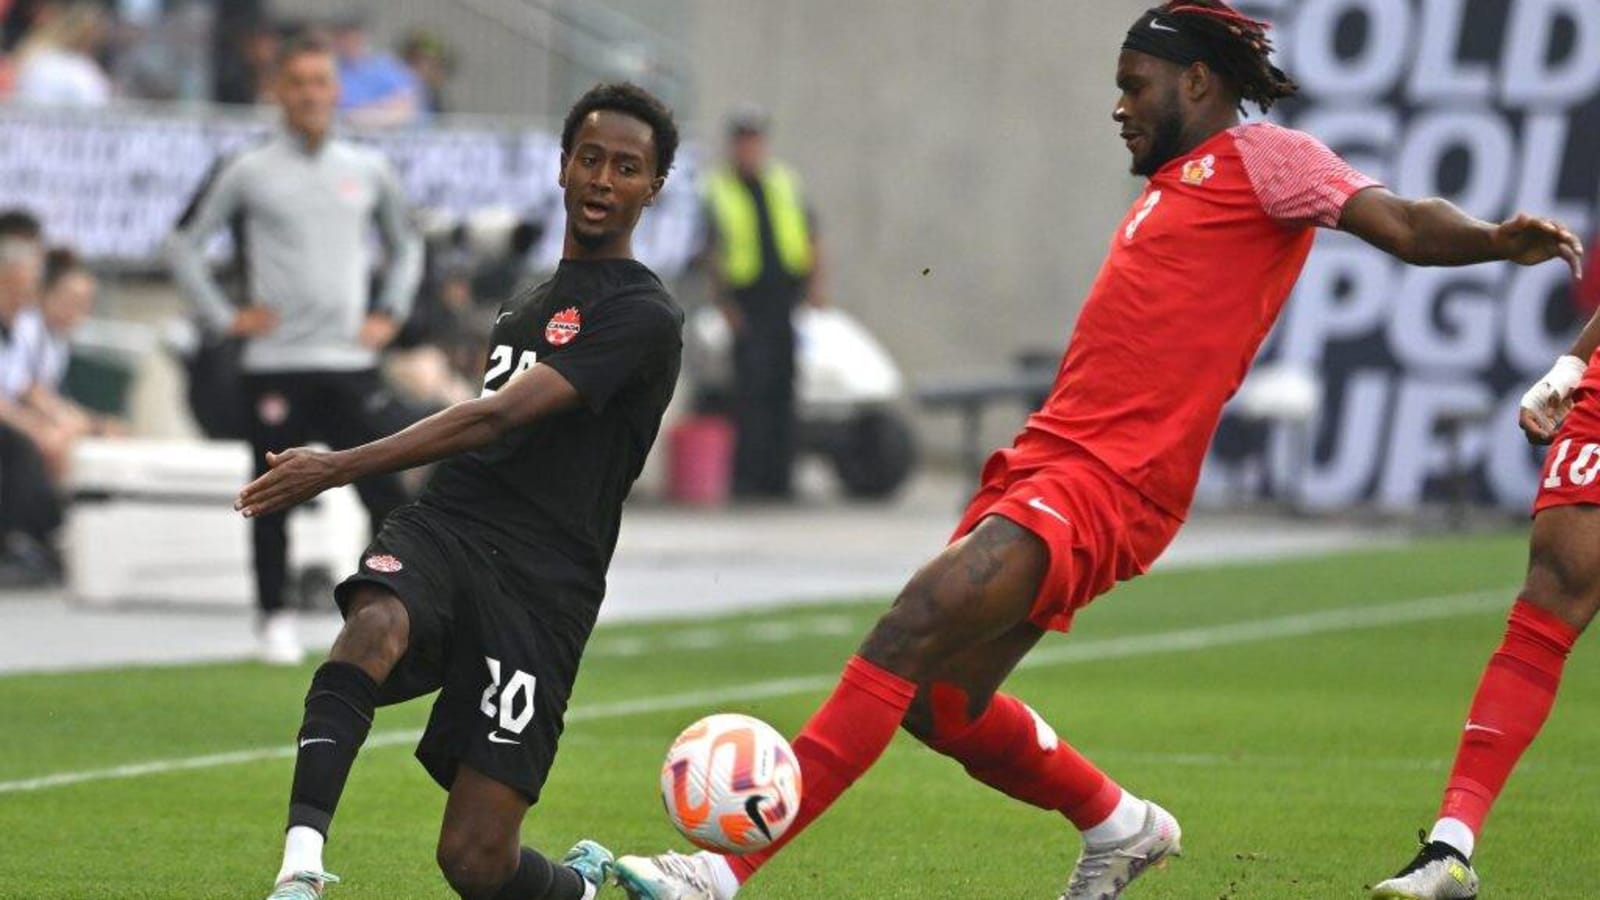 CanMNT’s Ali Ahmed Impresses in Draw Against Guadeloupe